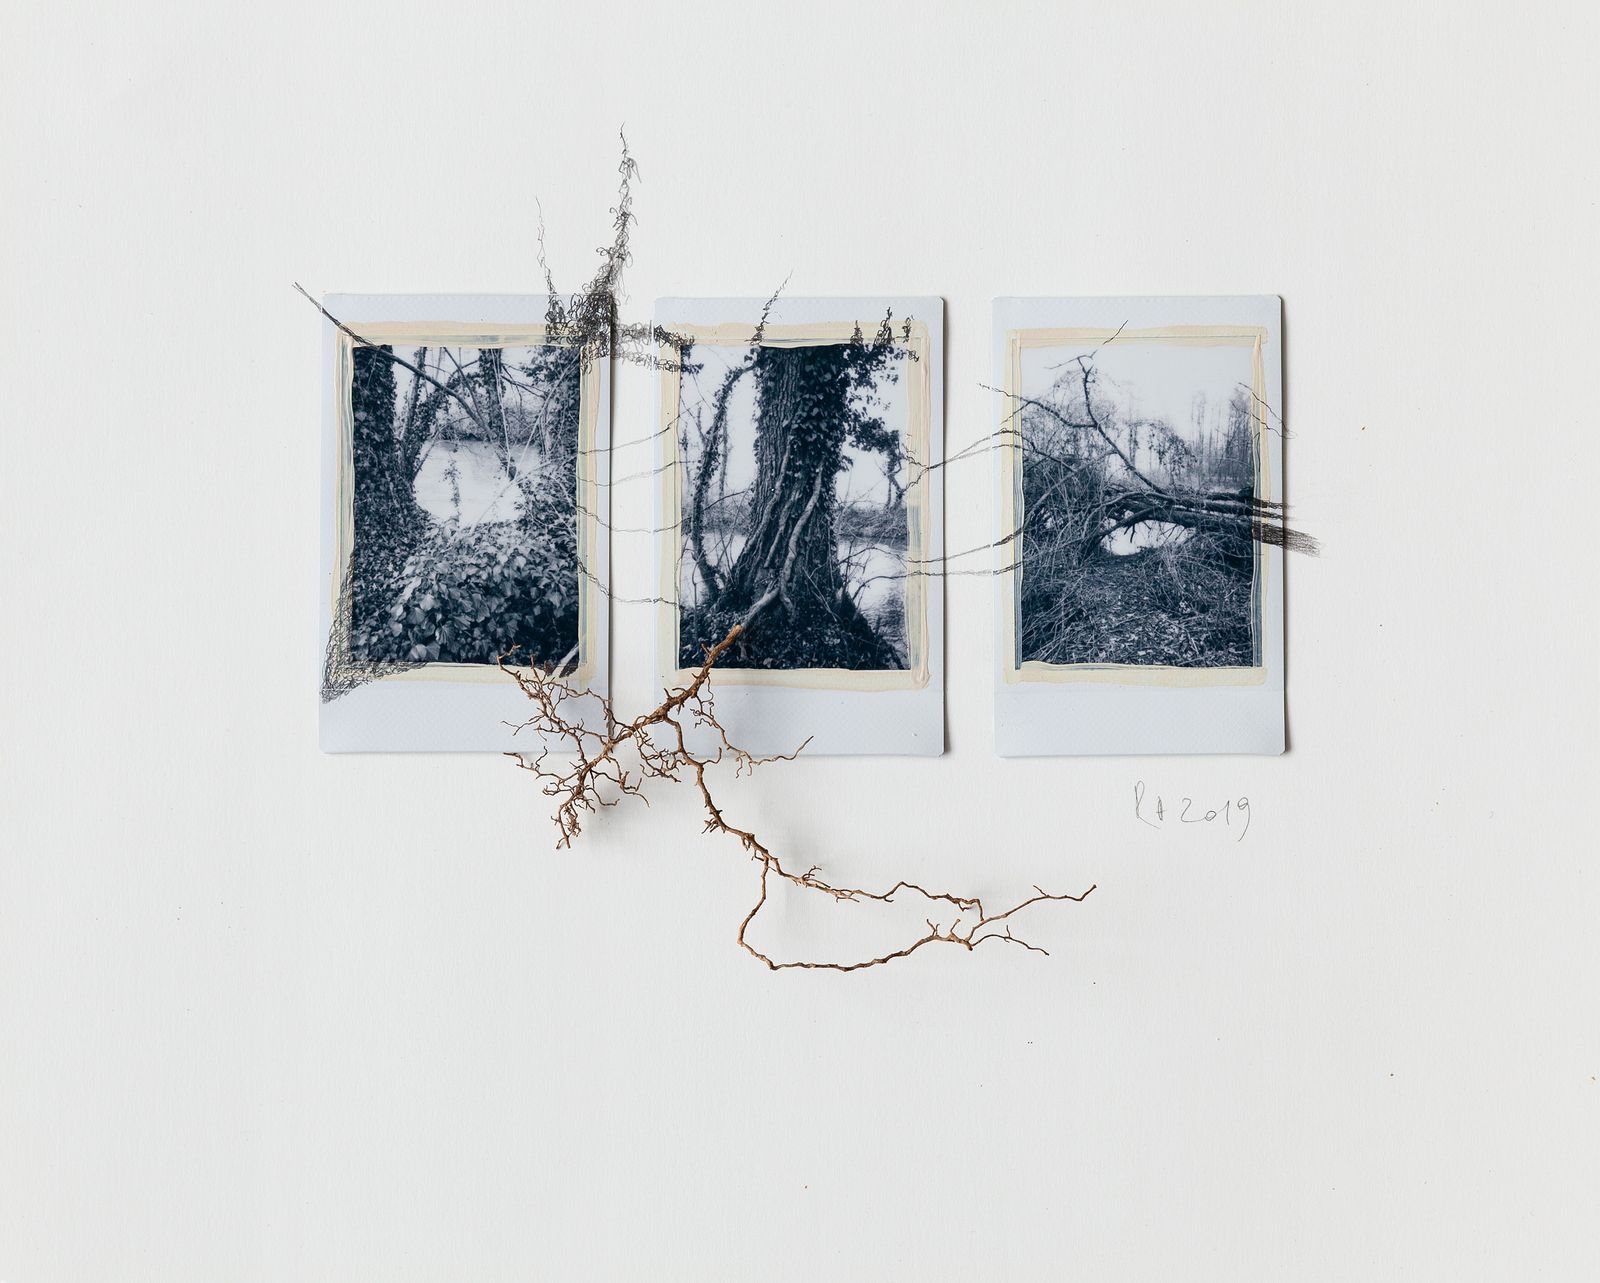 © Regina Anzenberger - Image from the SHIFTING ROOTS photography project